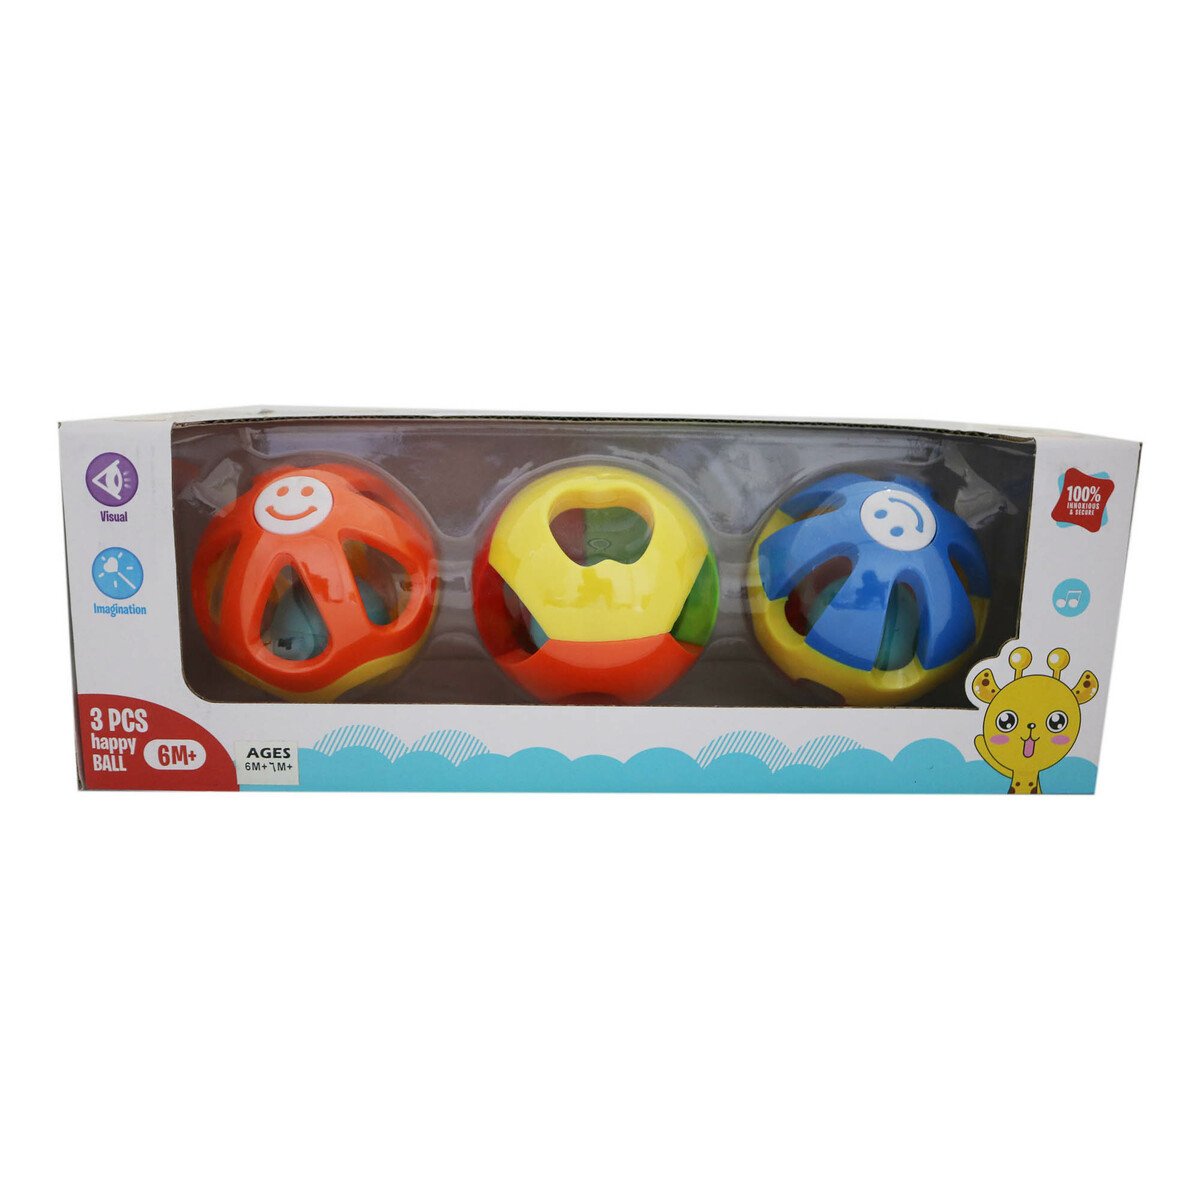 Skid Fusion Infant Baby Toy 618-19